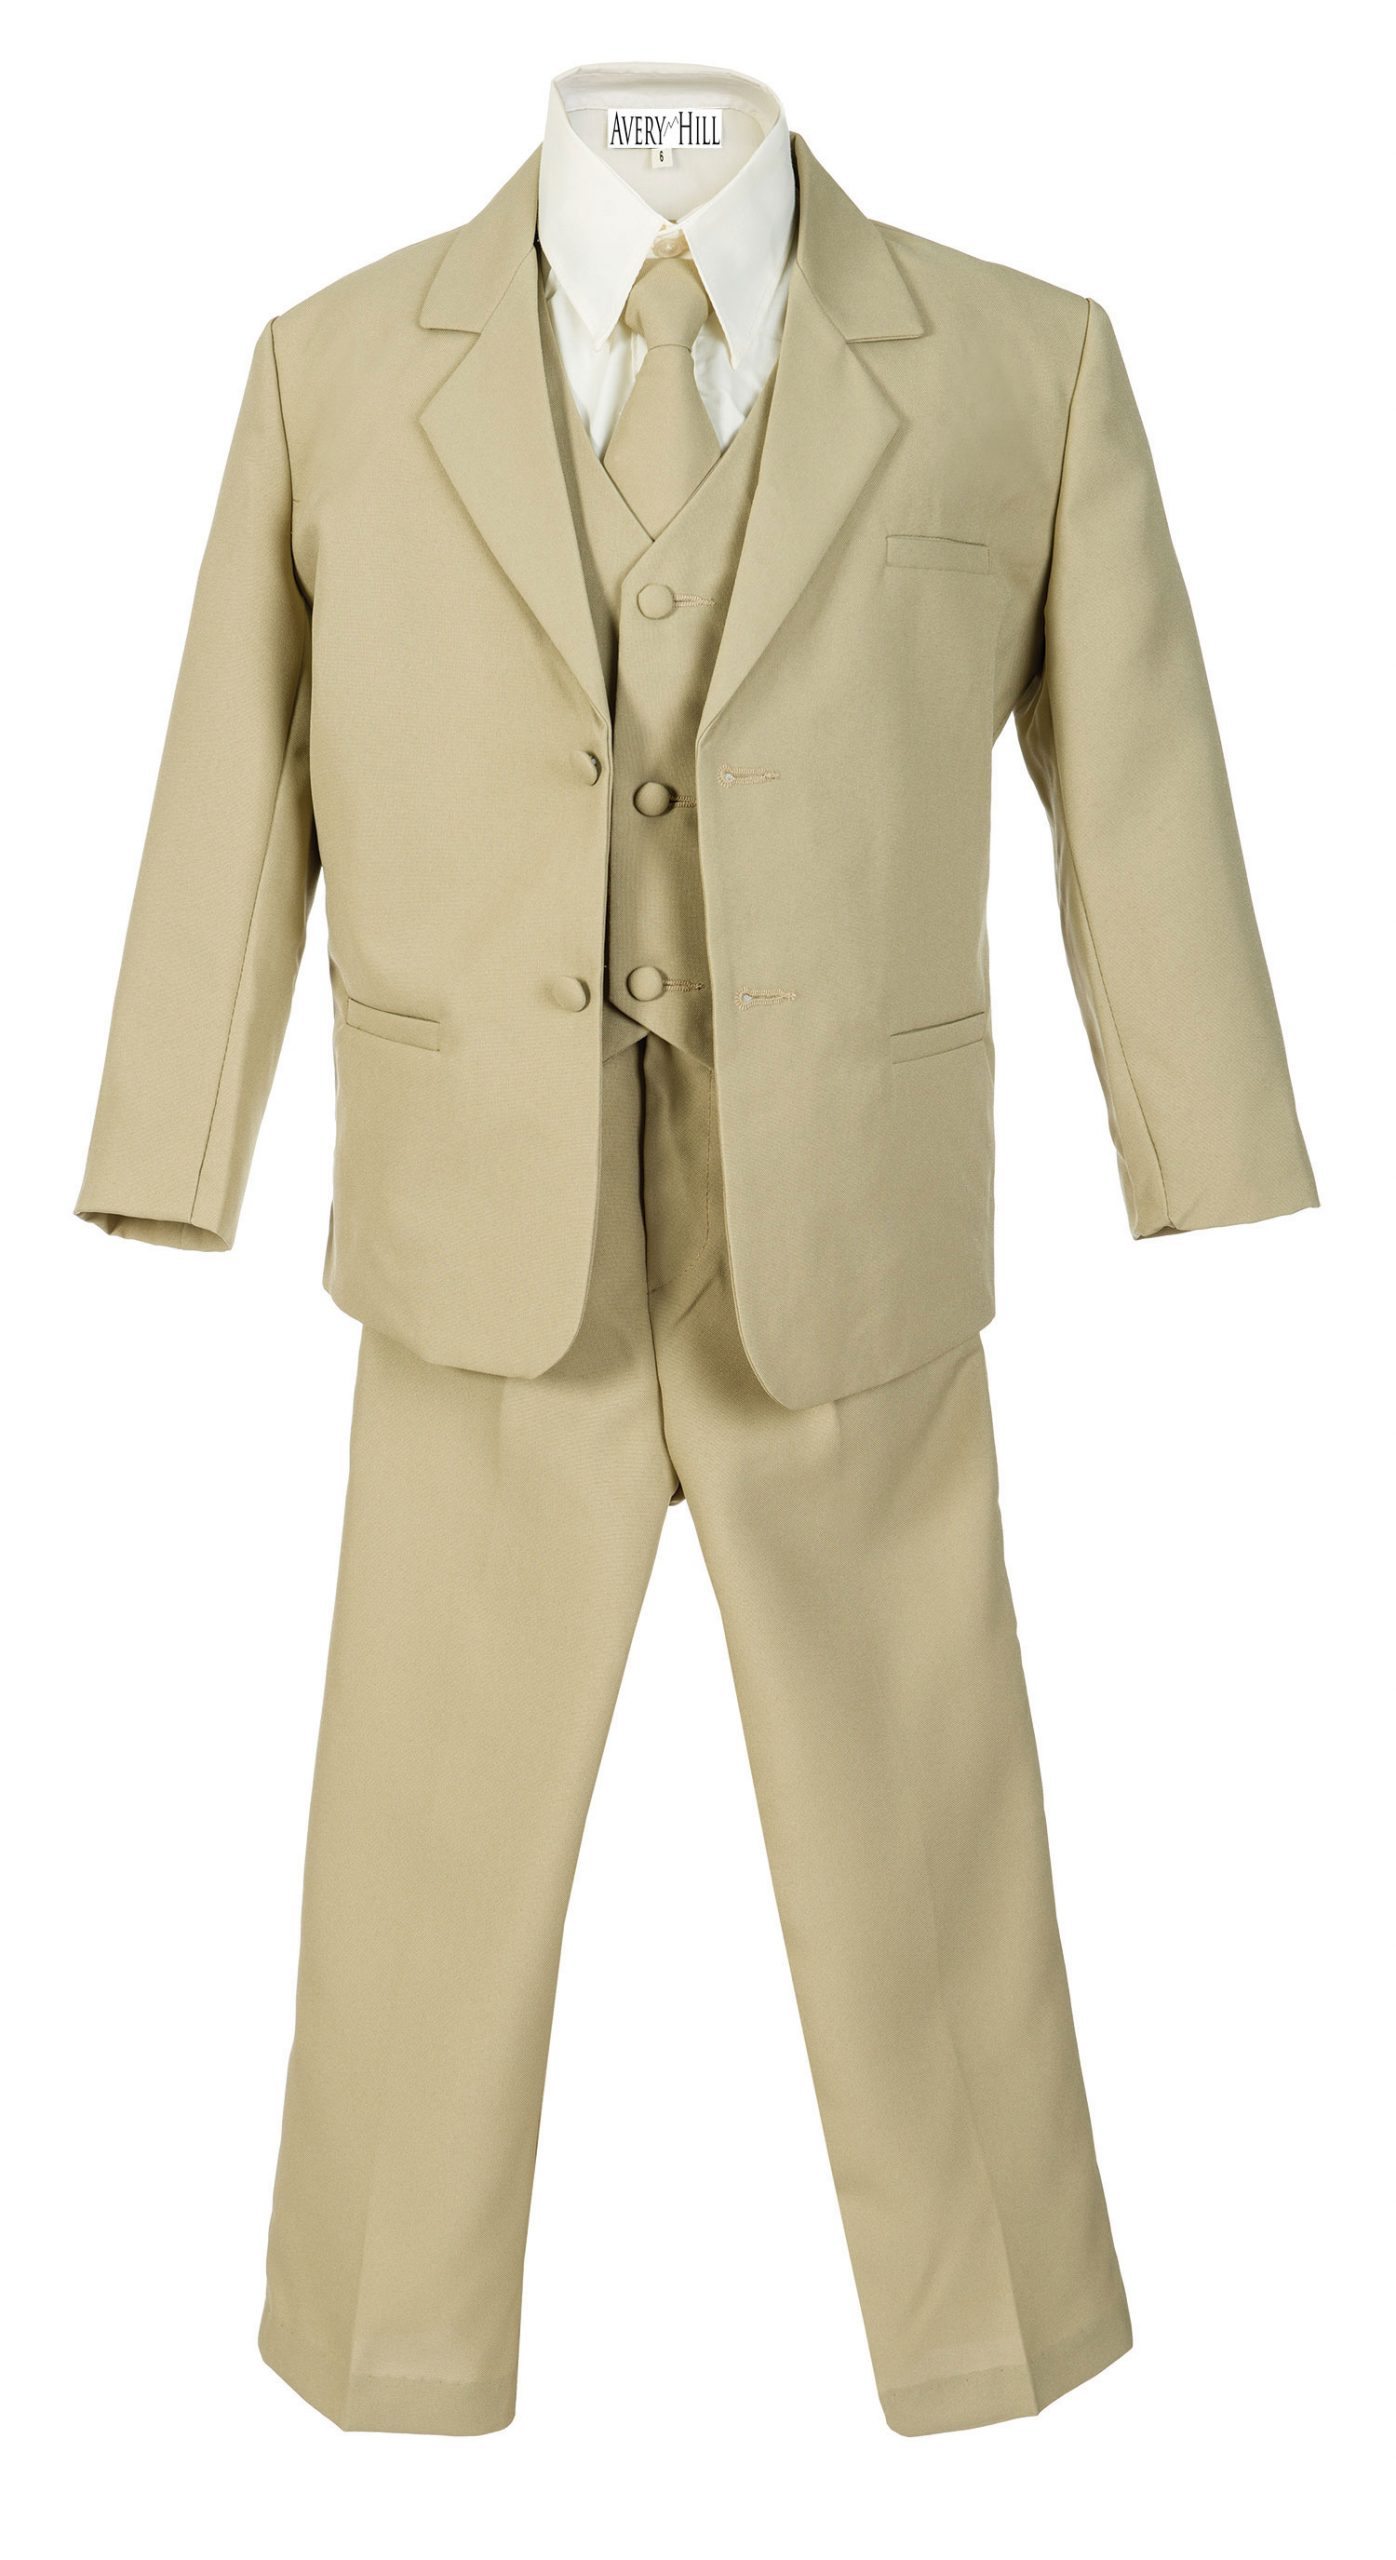 Avery Hill Boys Formal 5 Piece Suit with Shirt and Vest Khaki - 2T